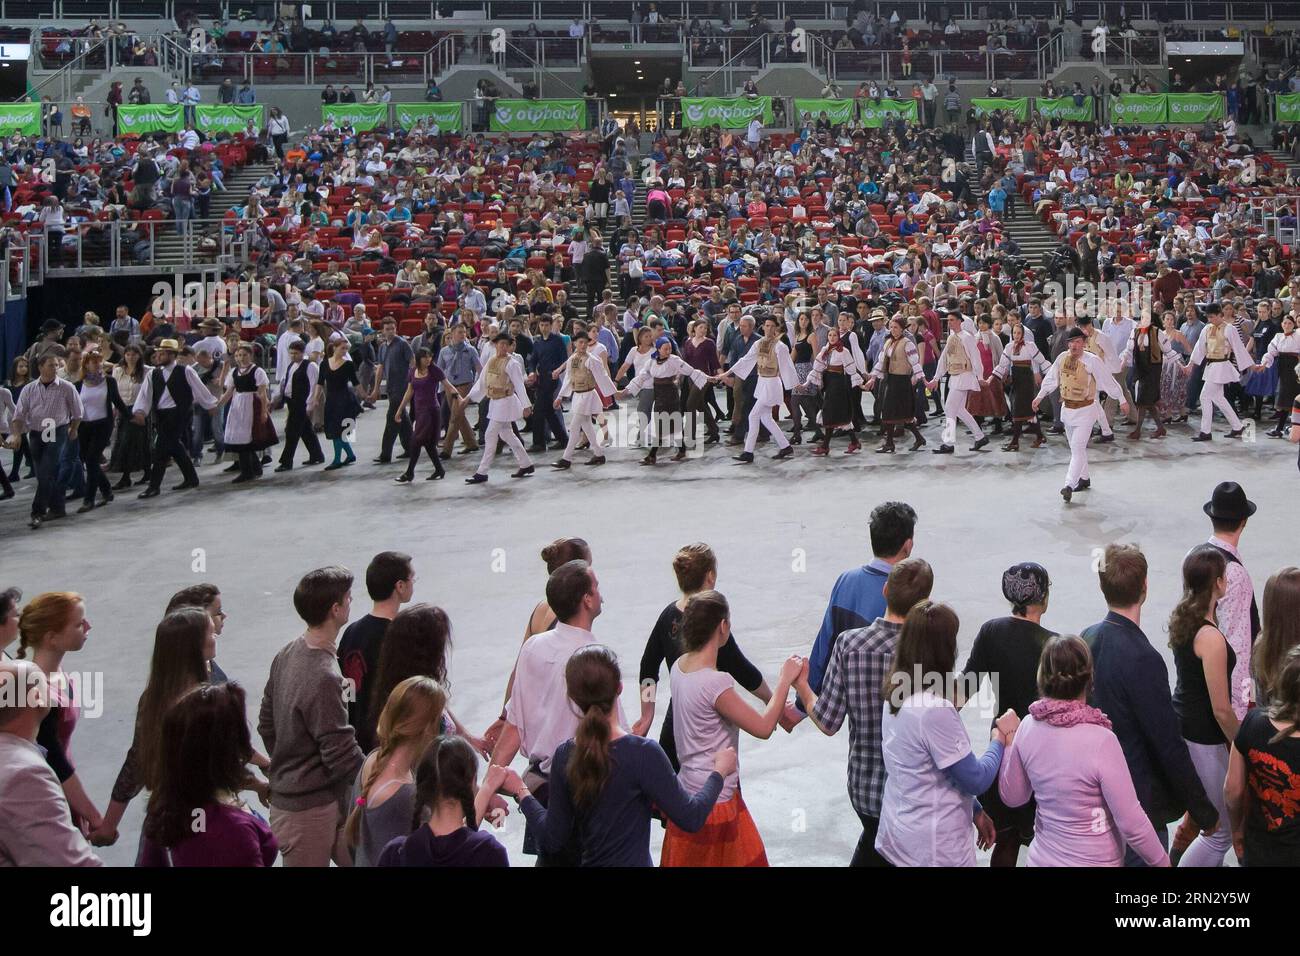 People dance during the National Folk Dance Gathering at the Papp Laszlo Sports Arena in Budapest, Hungary, on March 28, 2015. ) (dzl) HUNGARY-BUDAPEST-FOLK DANCE-FESTIVAL AttilaxVolgyi PUBLICATIONxNOTxINxCHN   Celebrities Dance during The National Folk Dance Gathering AT The Papp Laszlo Sports Arena in Budapest Hungary ON March 28 2015 dzl Hungary Budapest Folk Dance Festival ATTILAxVOLGYI PUBLICATIONxNOTxINxCHN Stock Photo